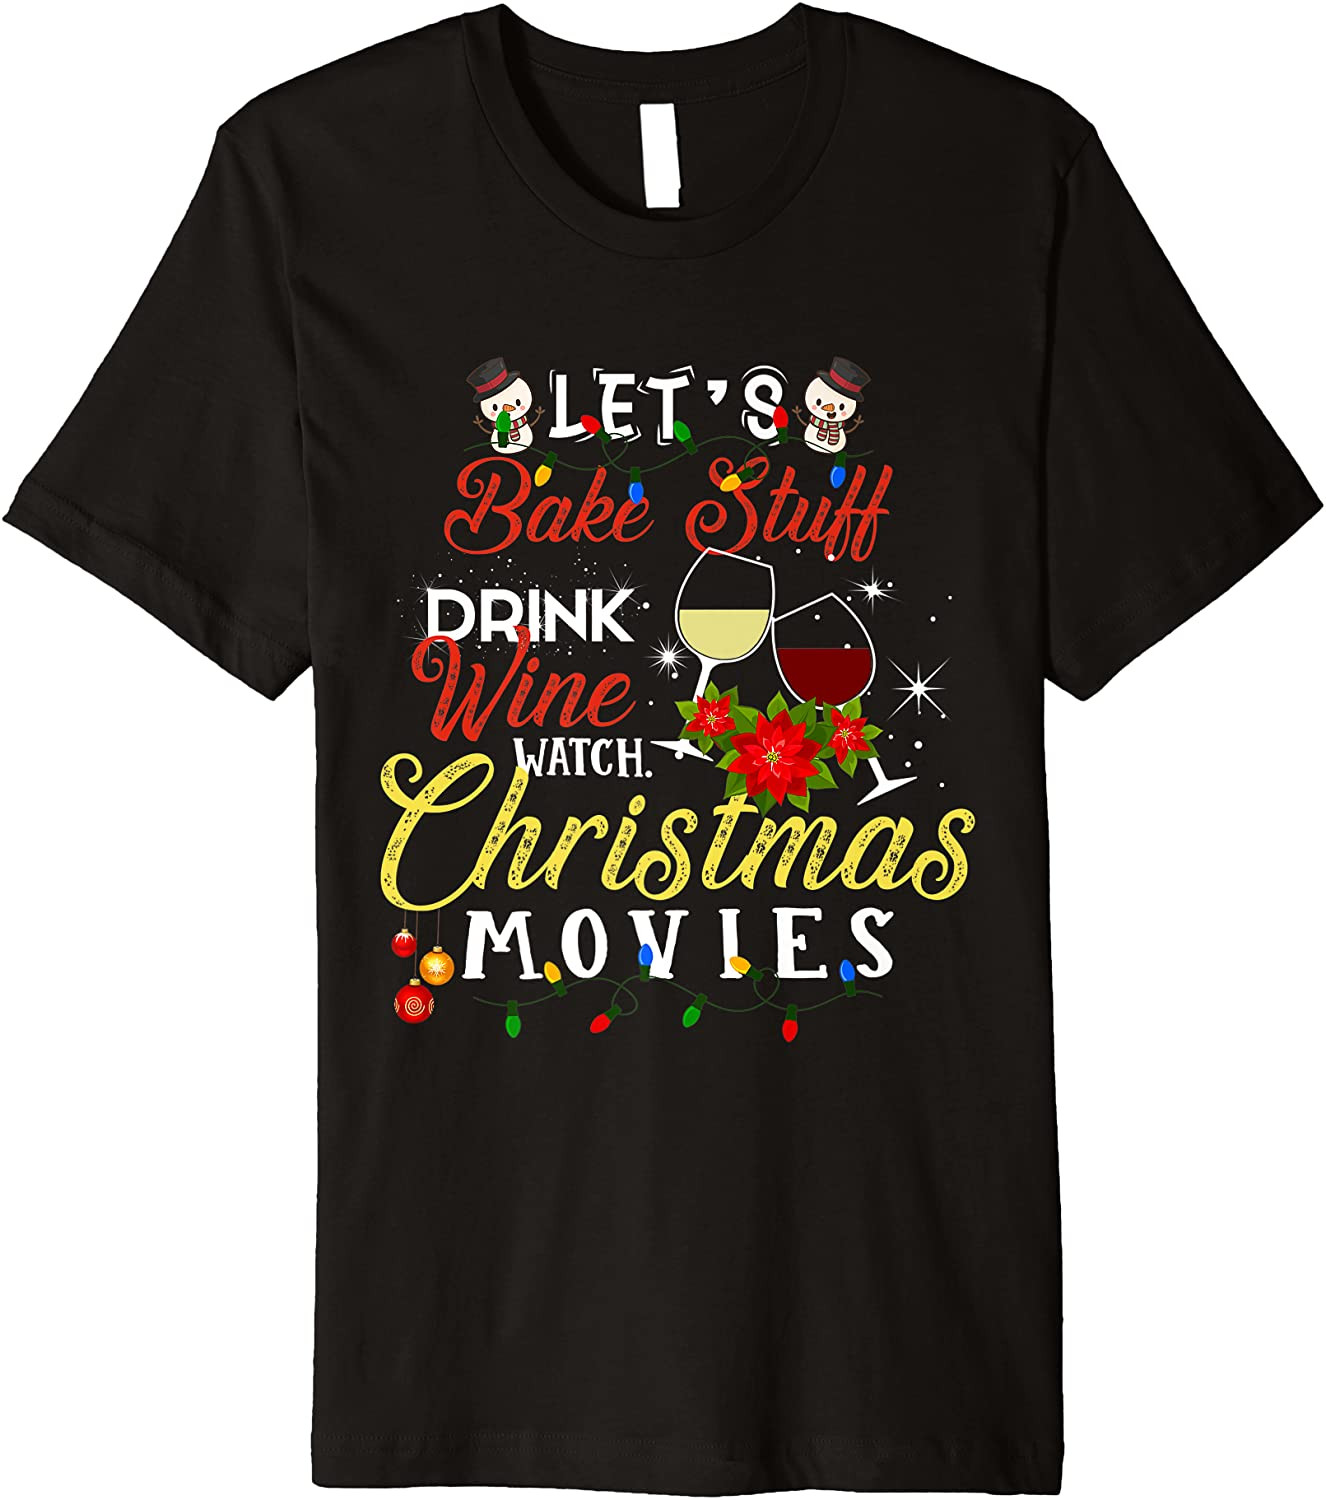 Let's Bake Stuff Drink Wine And Watch Christmas Movies  T-Shirt